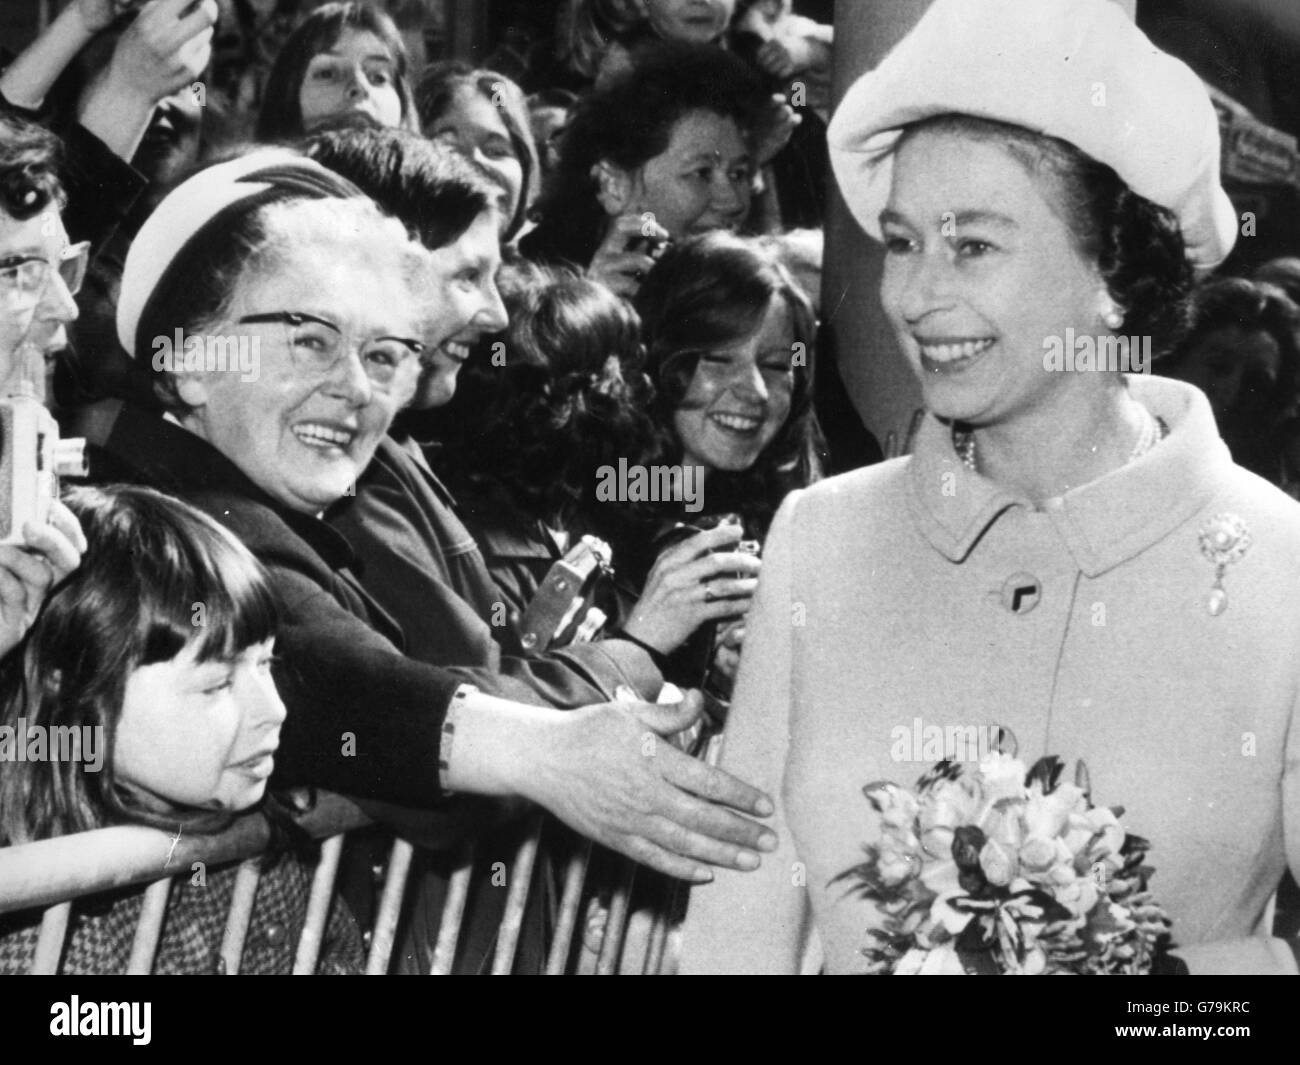 An admirer reaches out to touch the Queen at Preston Railway Station, where she and Prince Philip were boarding a train for a tour of the electrification of the British Railways Anglo-Scottish route between Preston and Glasgow. Stock Photo